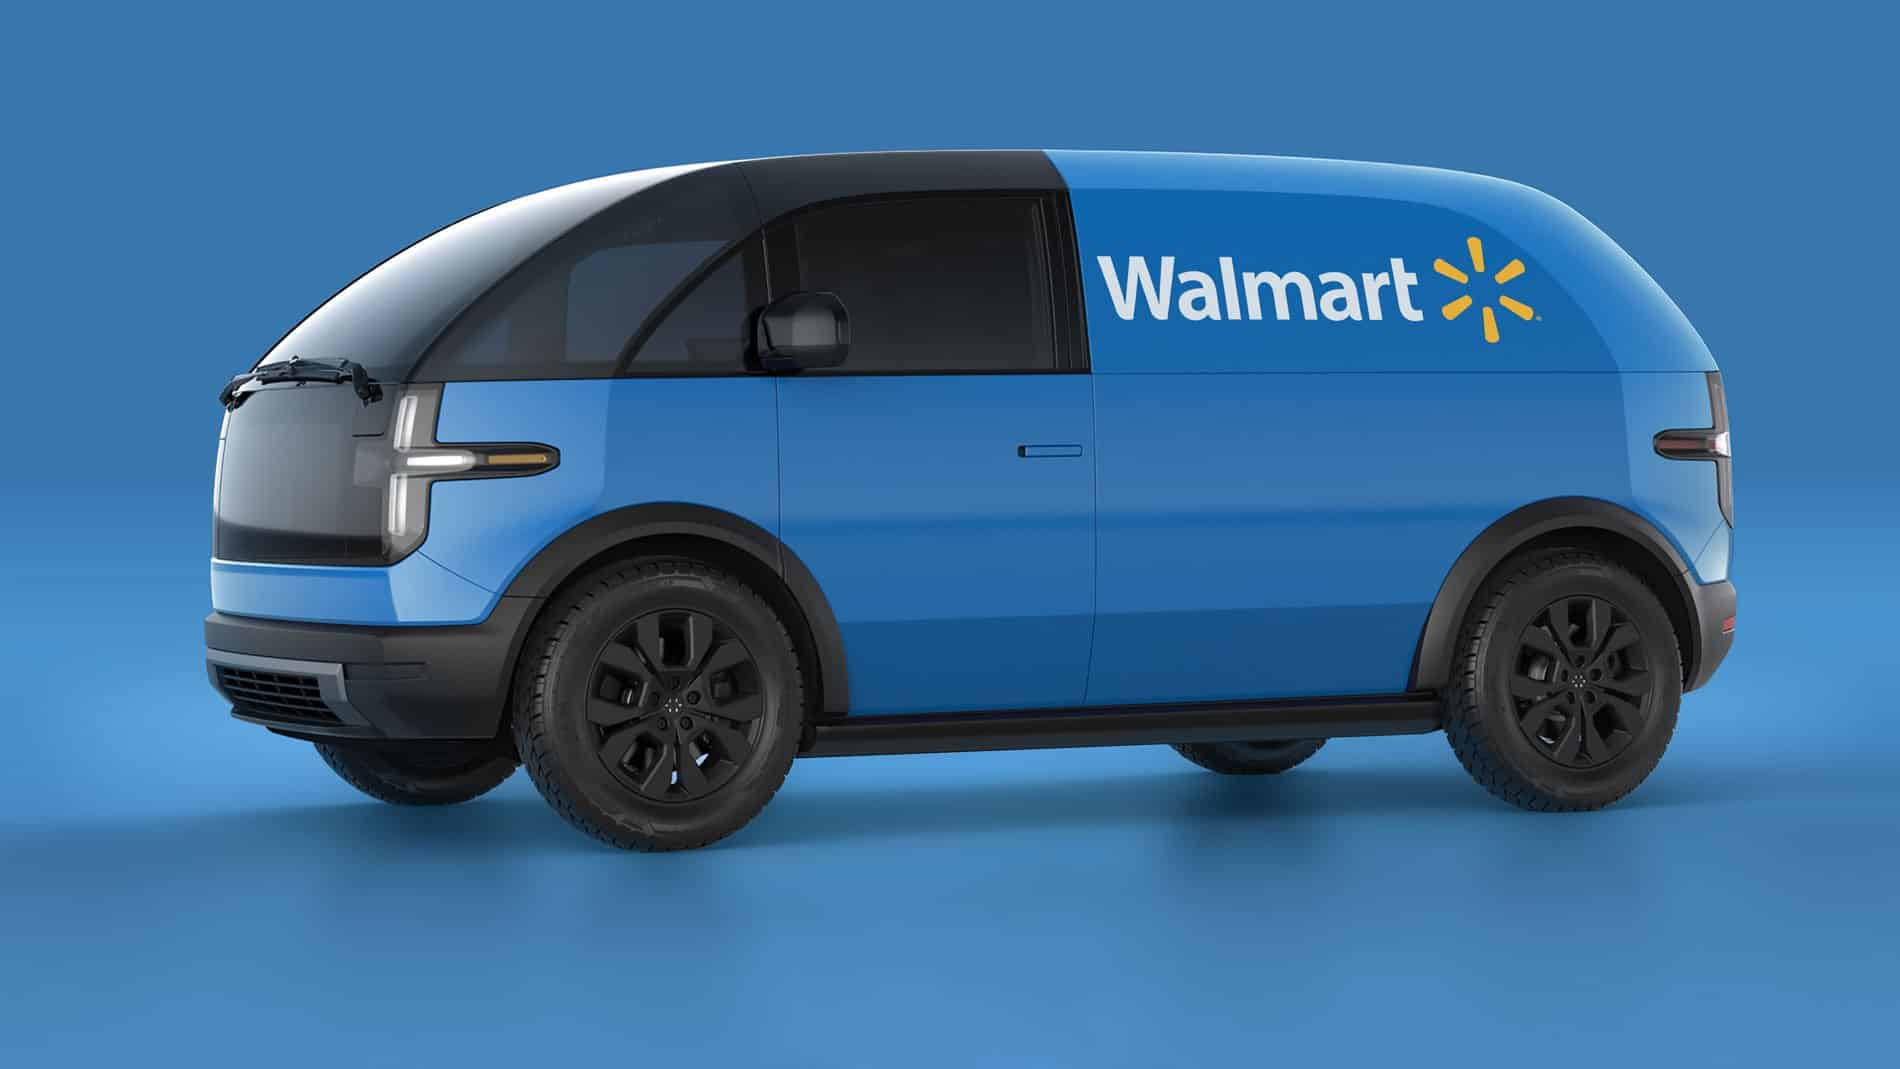 Walmart to Use a Canoo For Electric Deliveries The EV Report